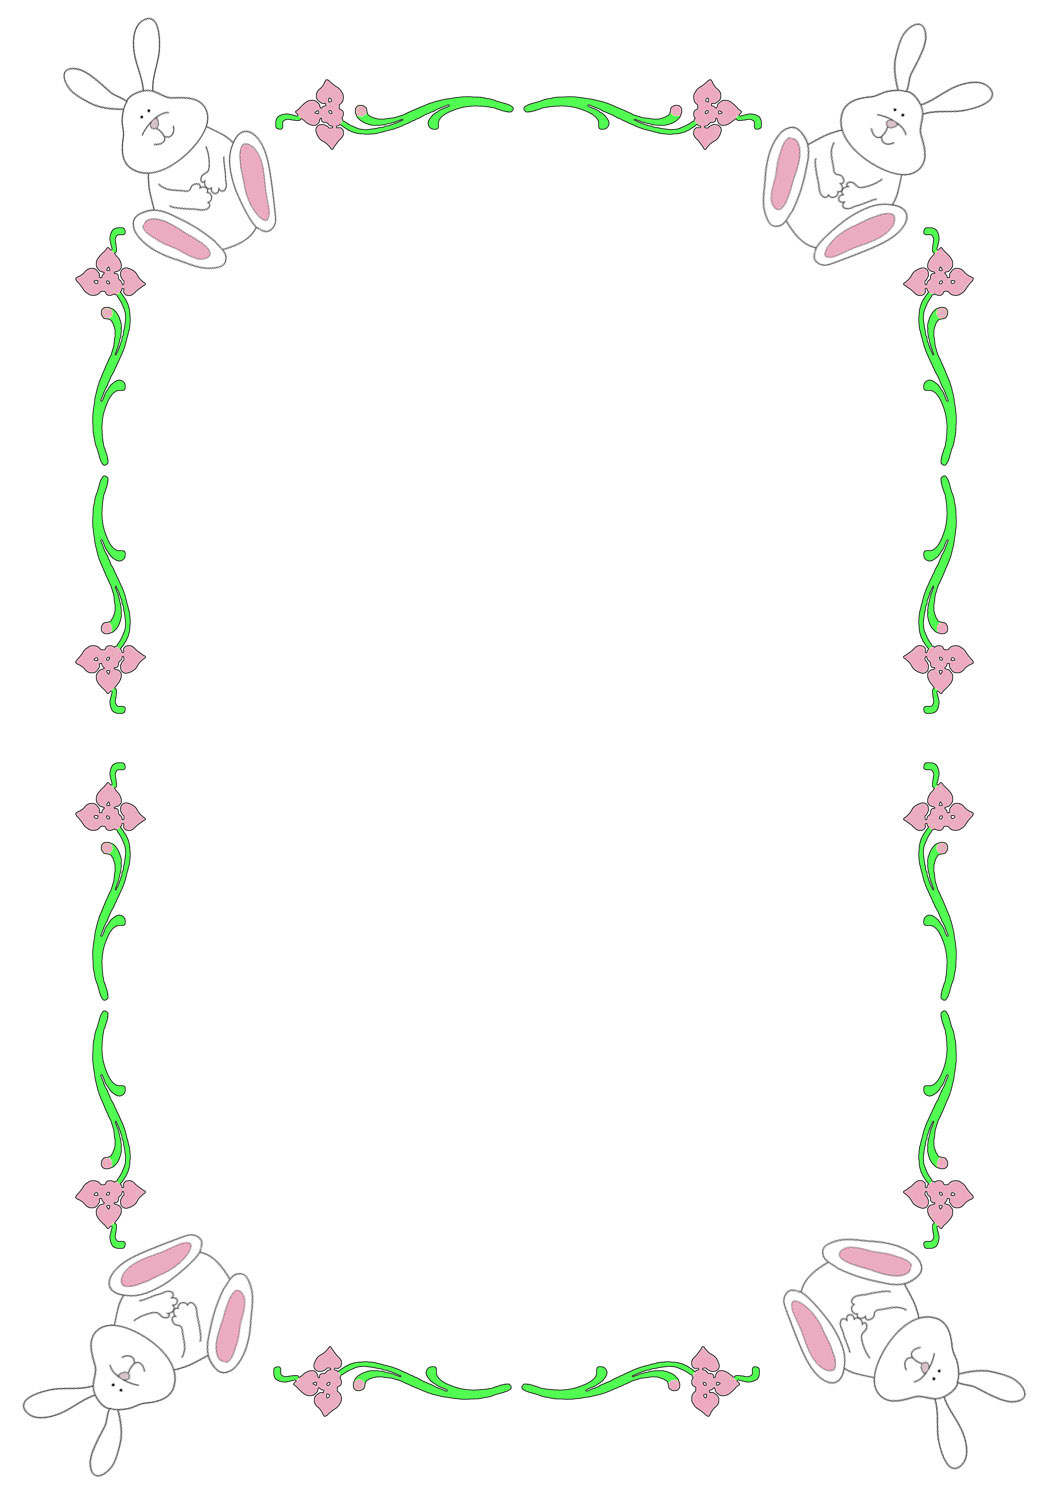 Free Printable Borders for Easter.